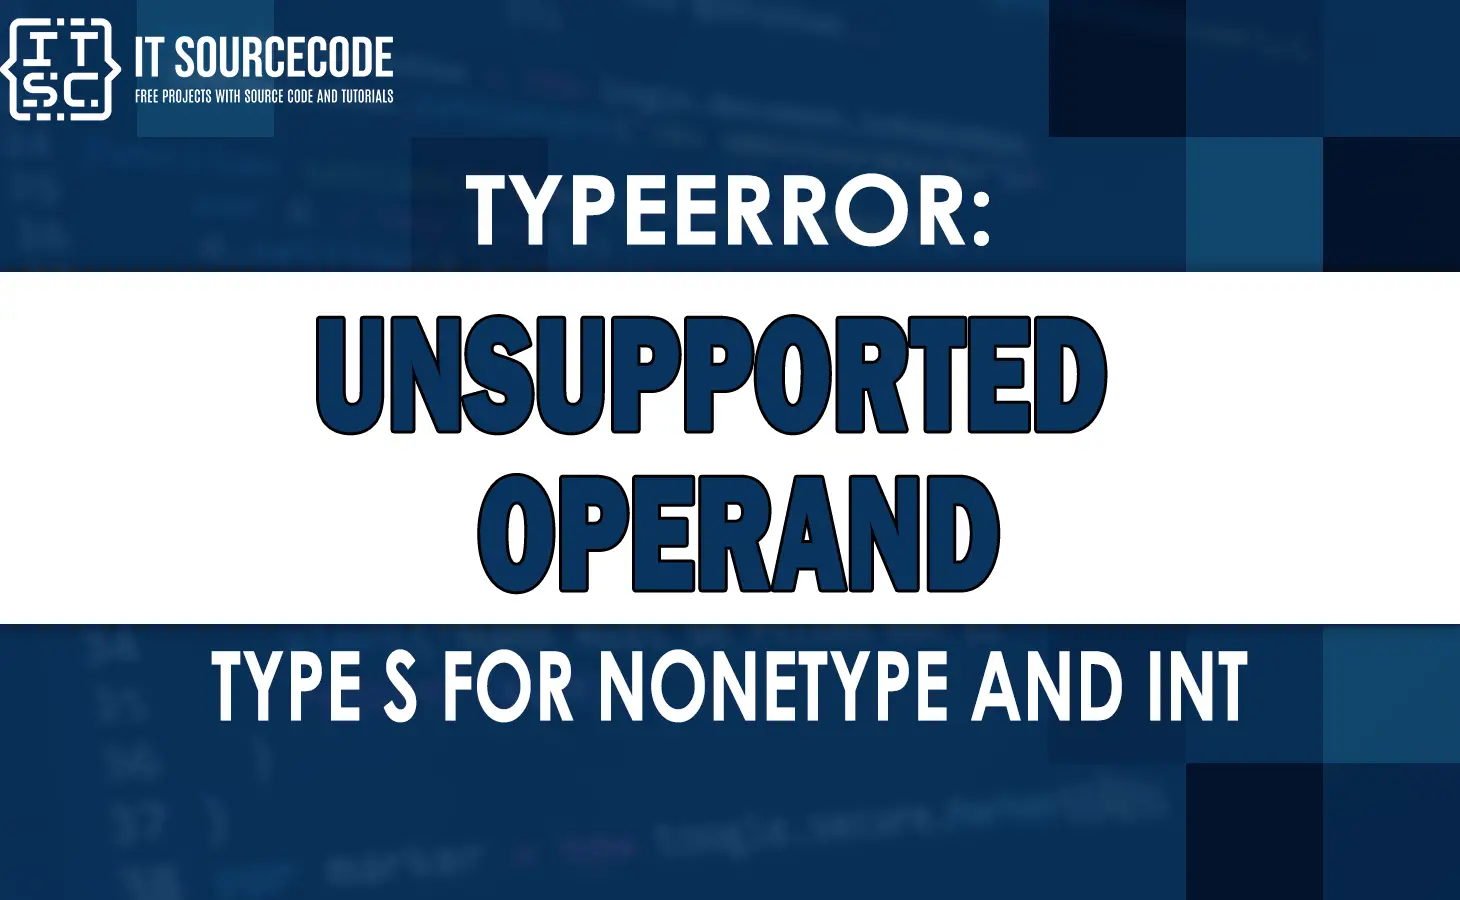 TYPEERROR unsupported operand Type s for INT and Str перевод. TYPEERROR: unsupported operand Type(s) for /: 'Str' and 'Float'. TYPEERROR: unsupported operand Type(s) for ** or Pow(): 'tuple' and 'INT'. Int and nonetype